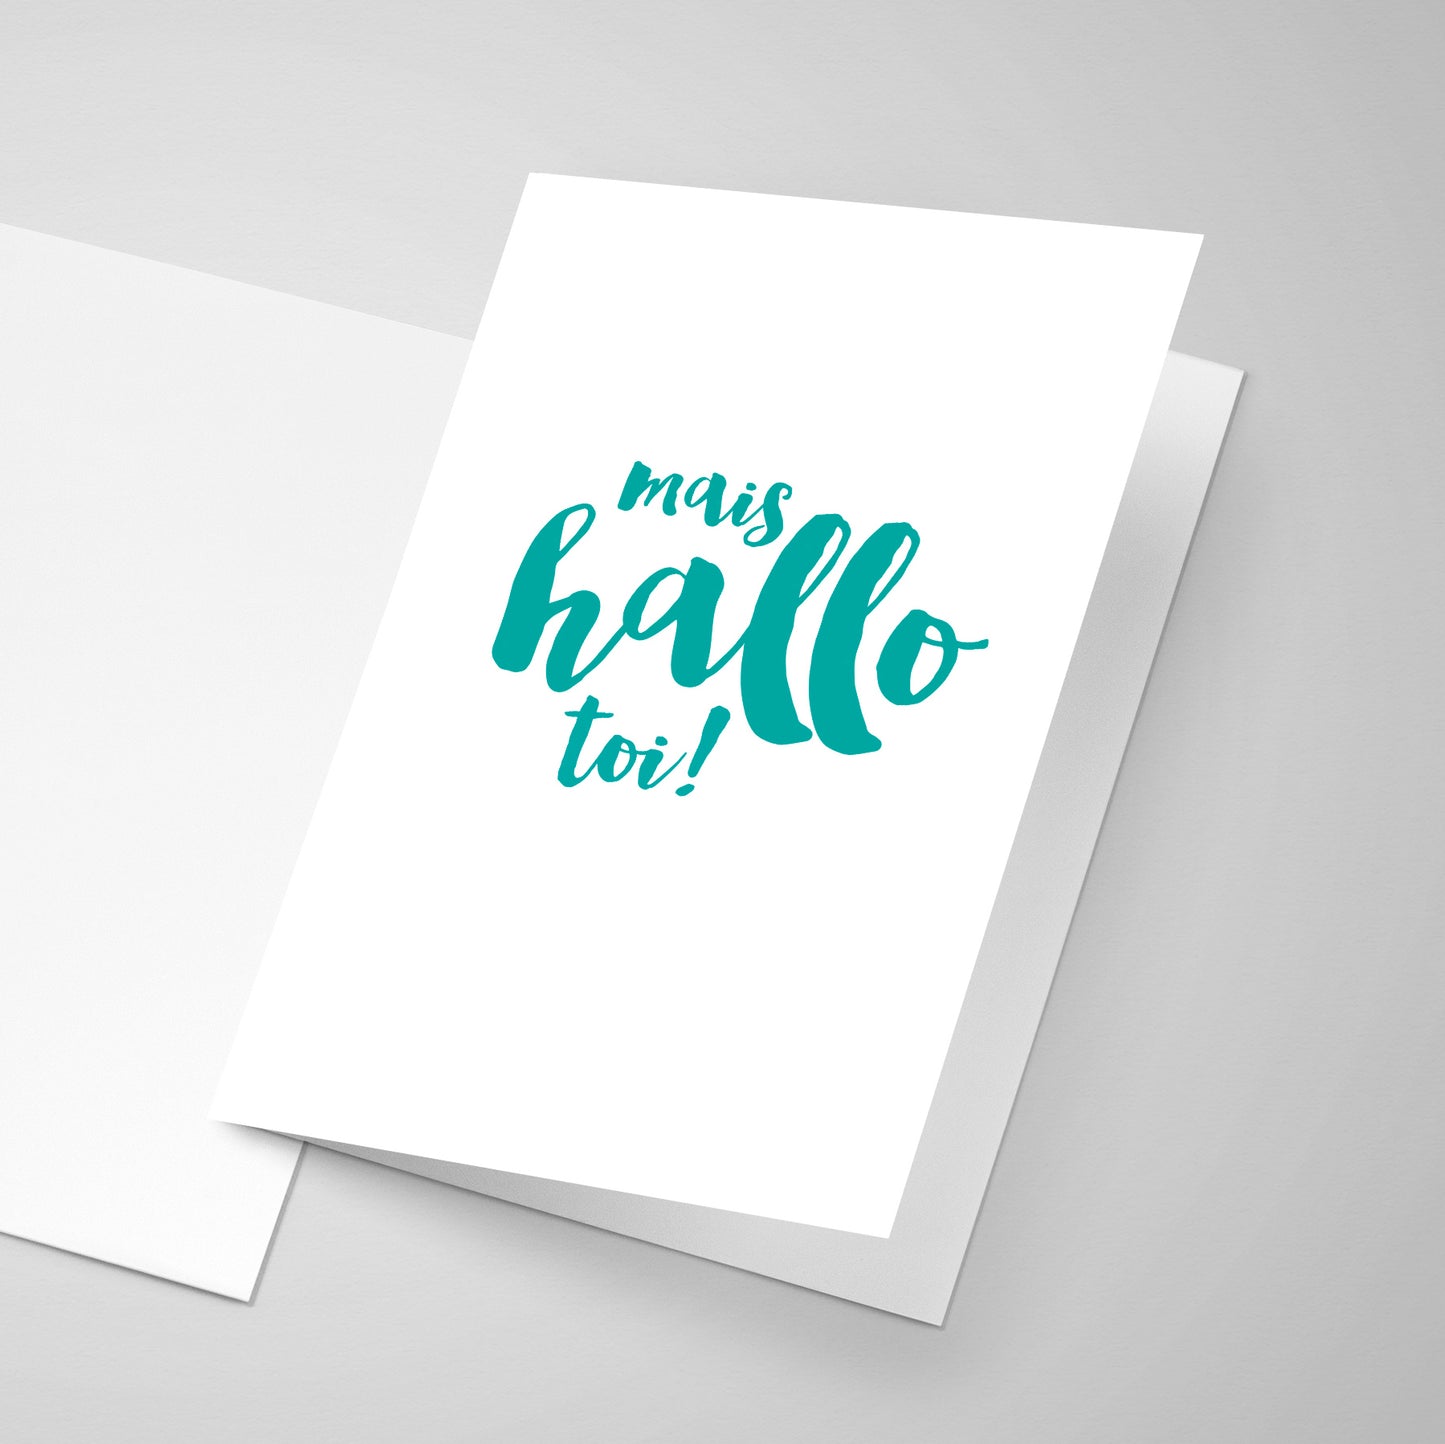 An Acadian (Acadien) french greeting card with the saying "Mais hello toi!"